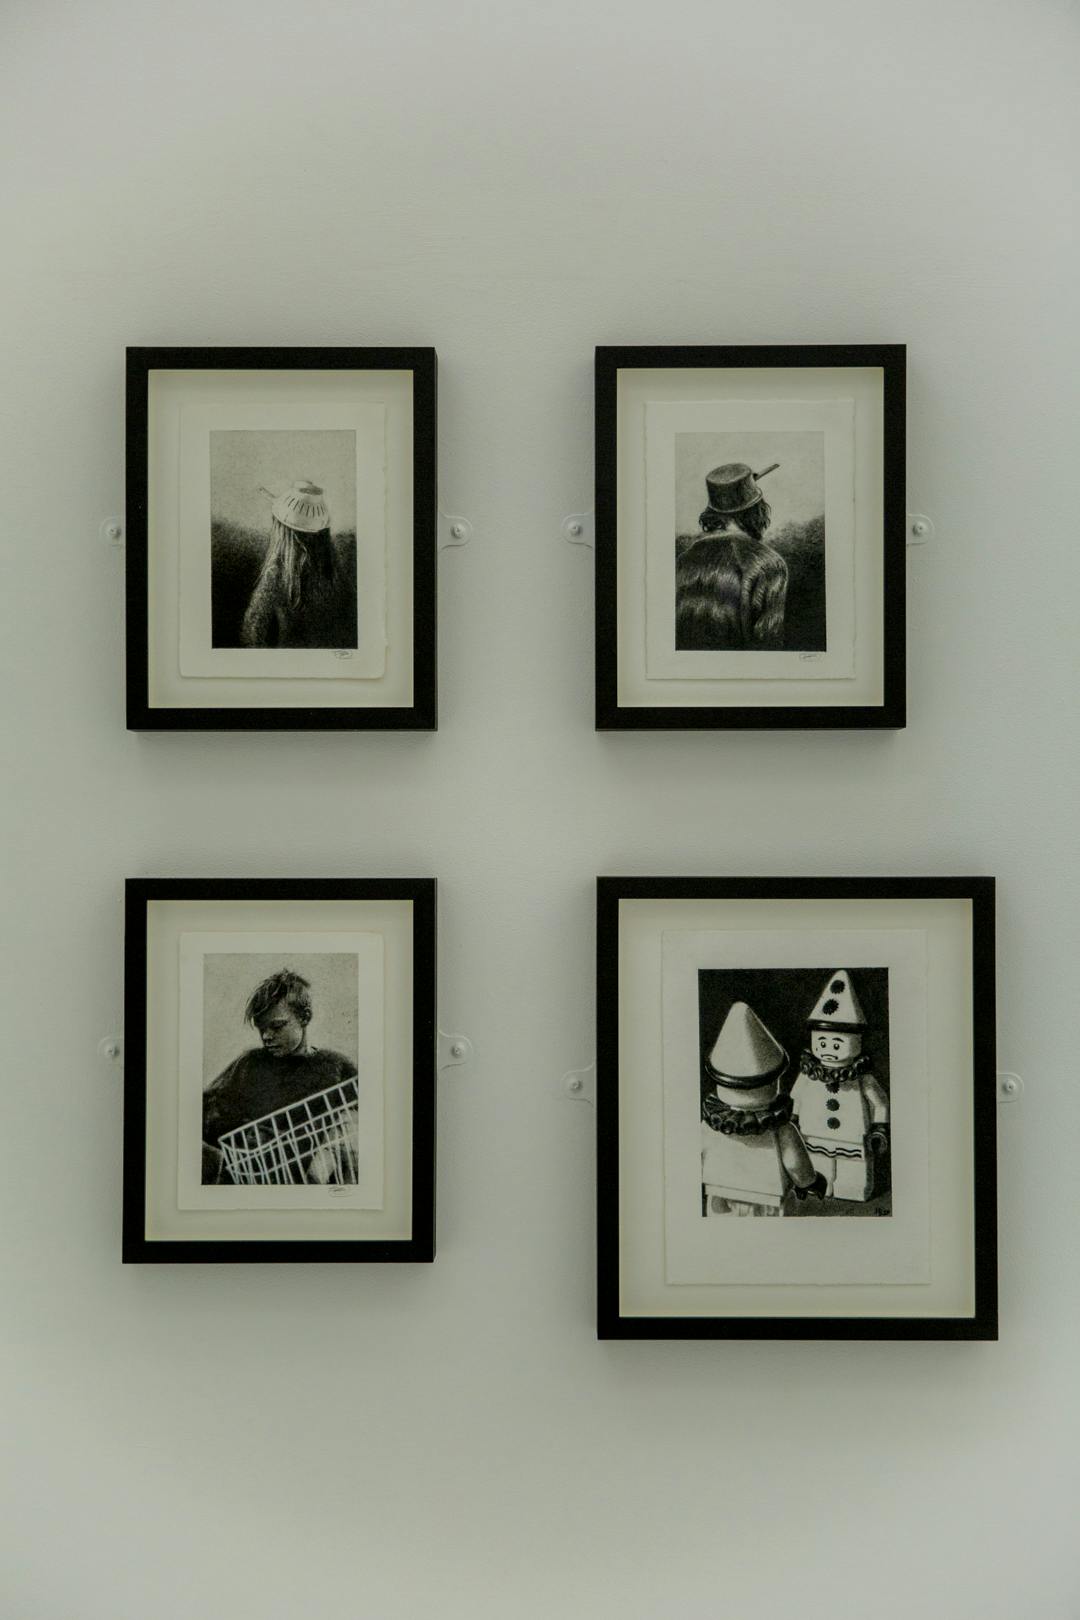 Image shows a collection of Phillip's handdrawn work in thick black frames on a neutral colour wall